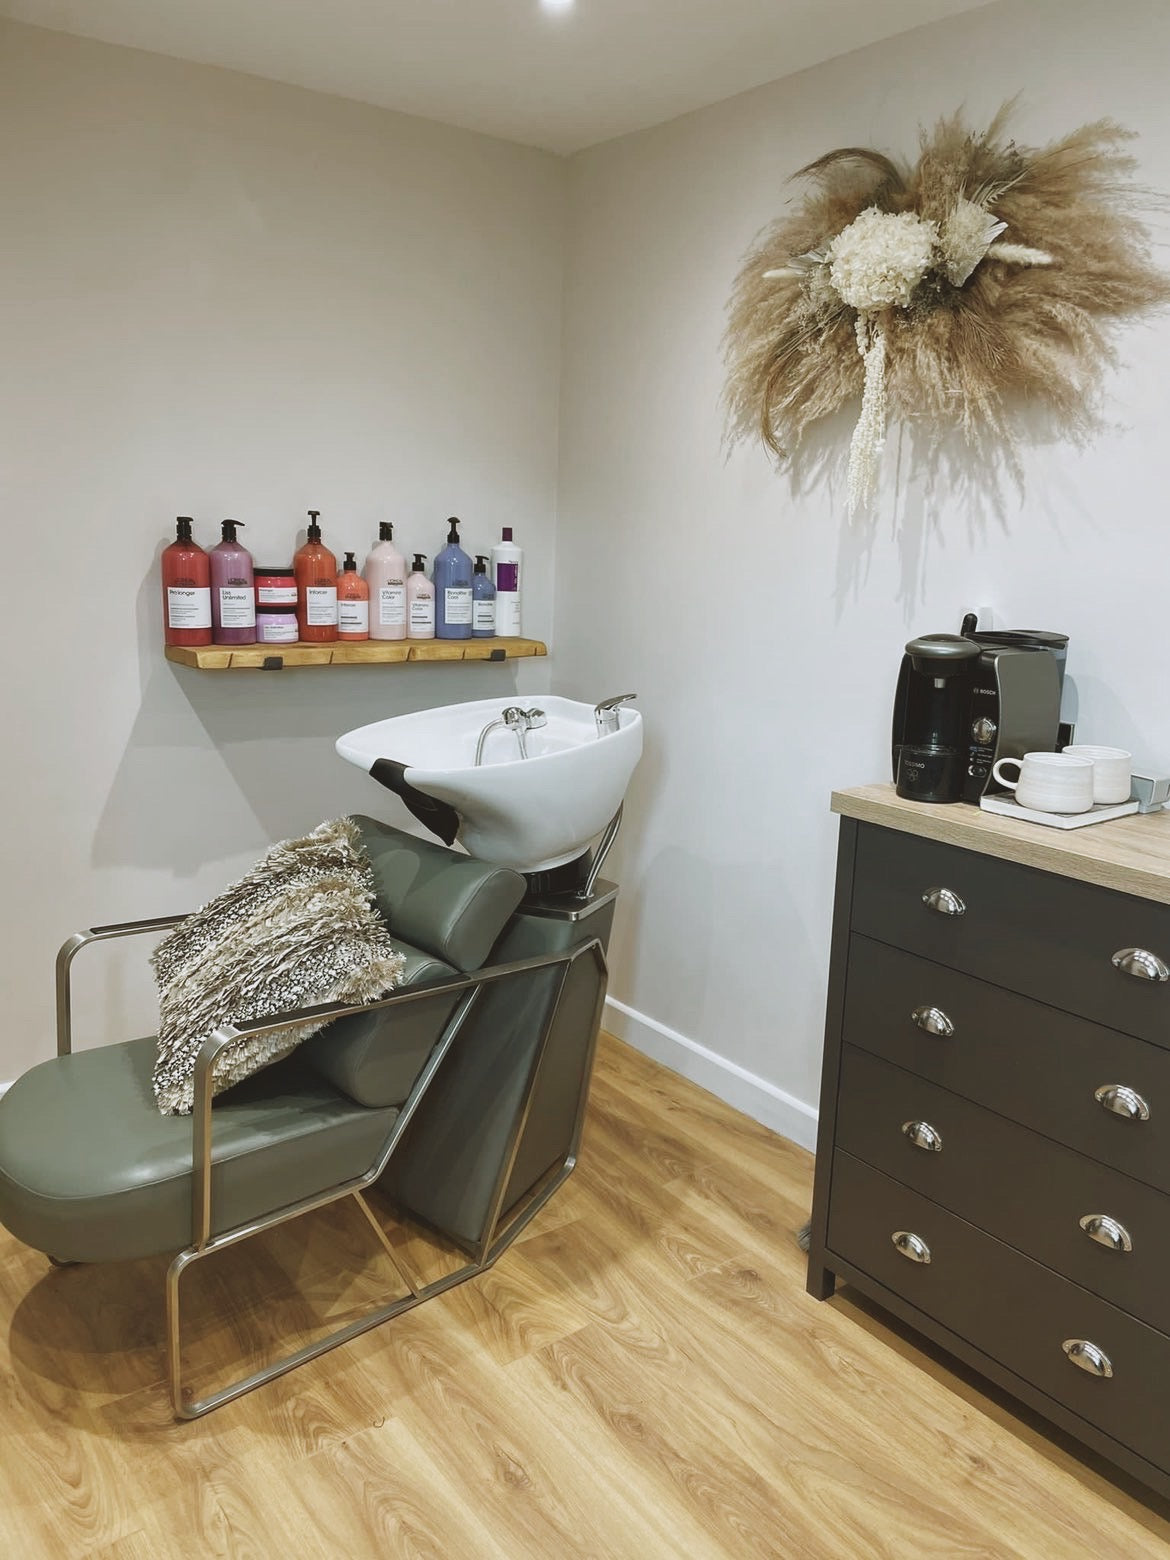 Pampas cloud decor for Leicestershire-based home hair salon Bella Hair. Dried floral wall installations for businesses in Leicestershire and the UK.